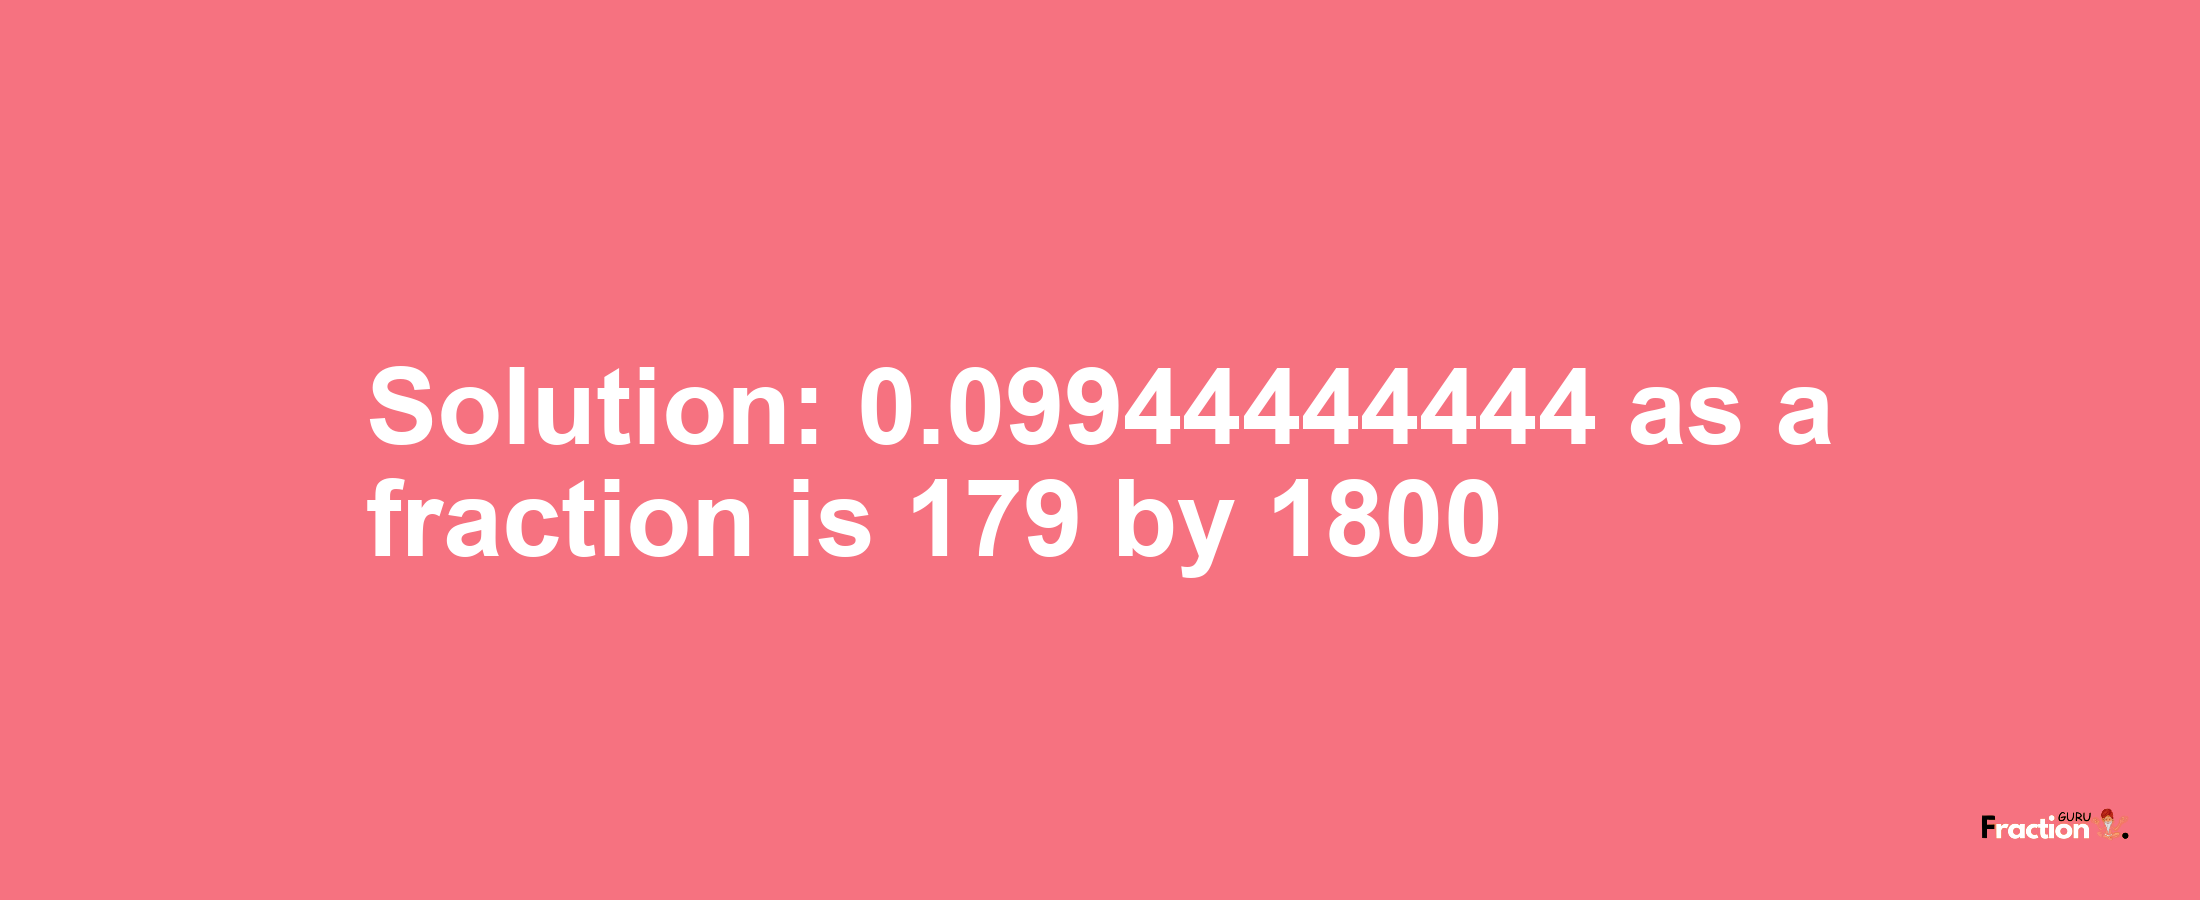 Solution:0.09944444444 as a fraction is 179/1800